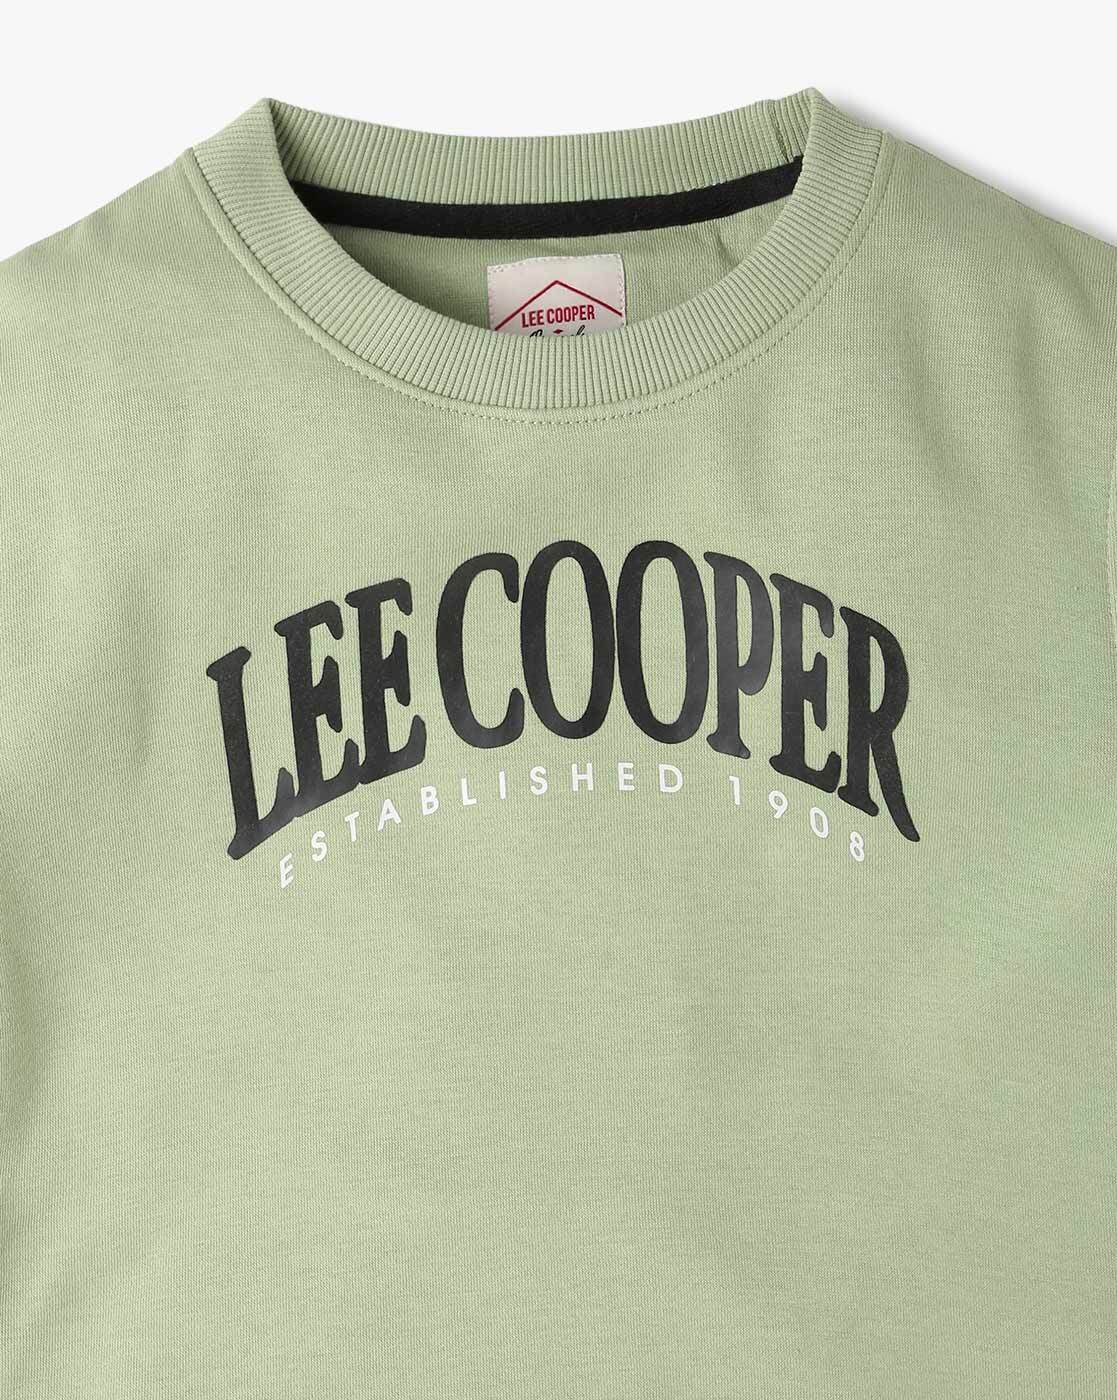 LEE COOPER - BRANDING PROJECT | Branding, Projects, Hang tags